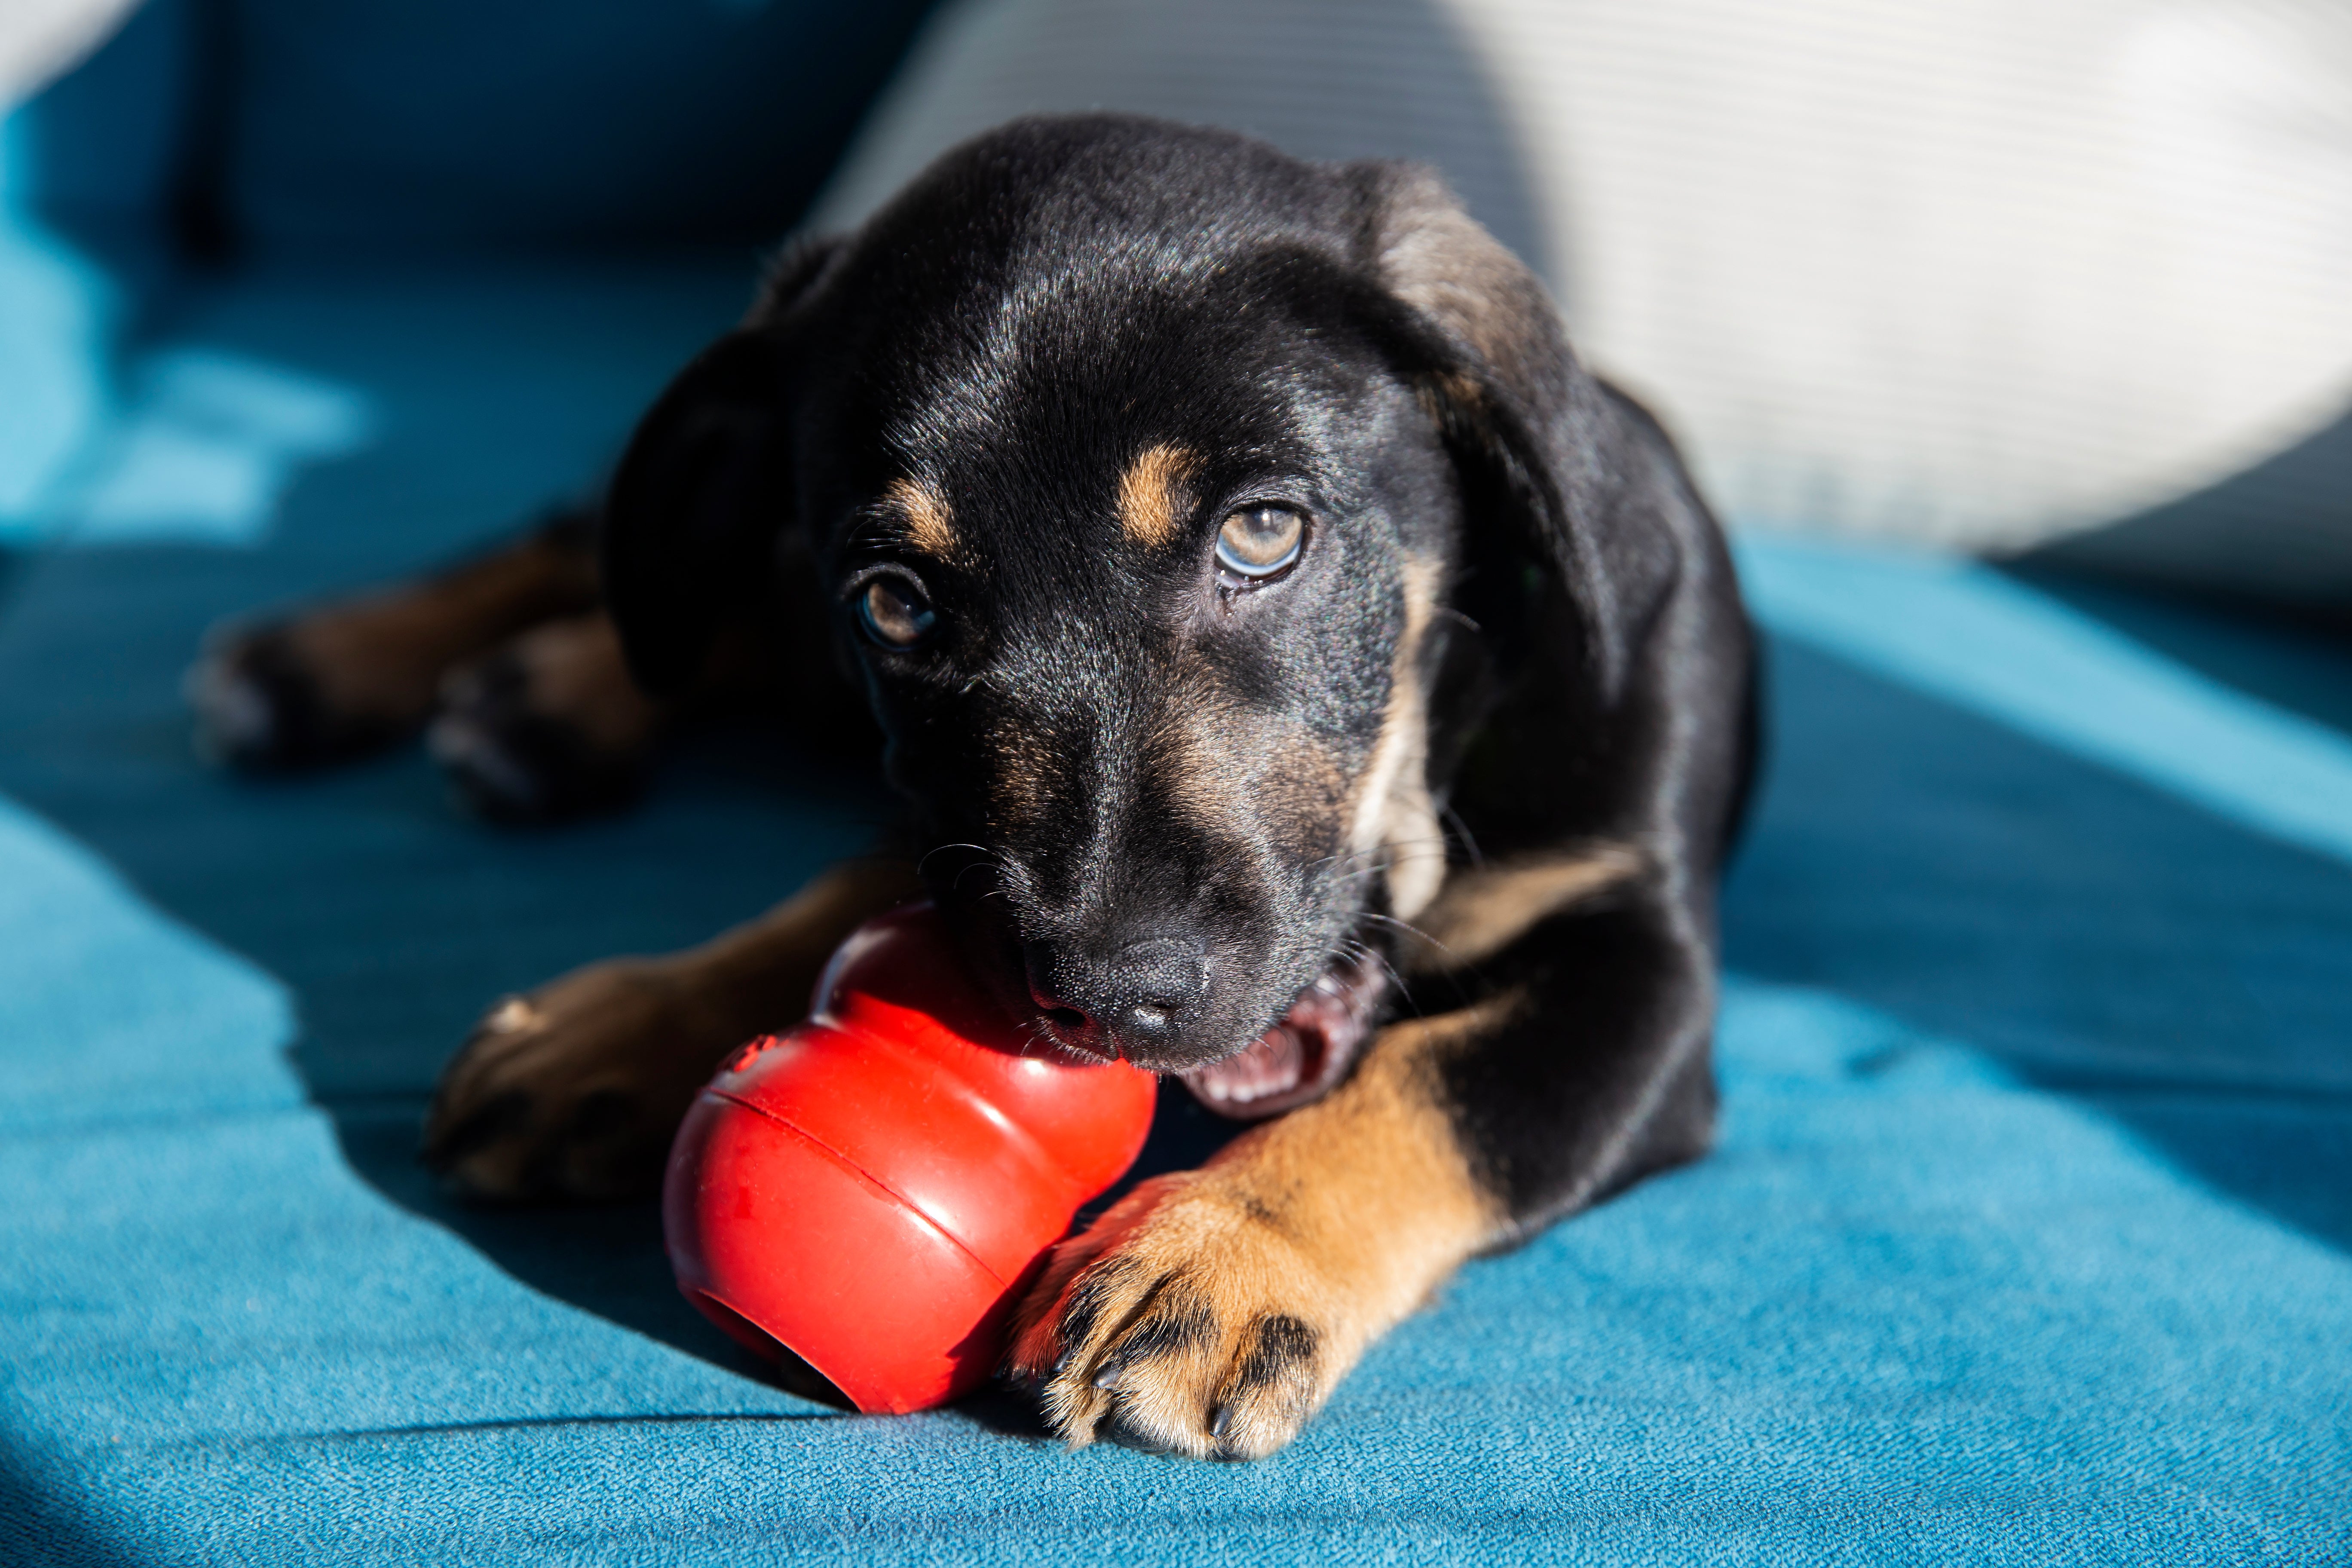 Dog chewing on a red kong toy